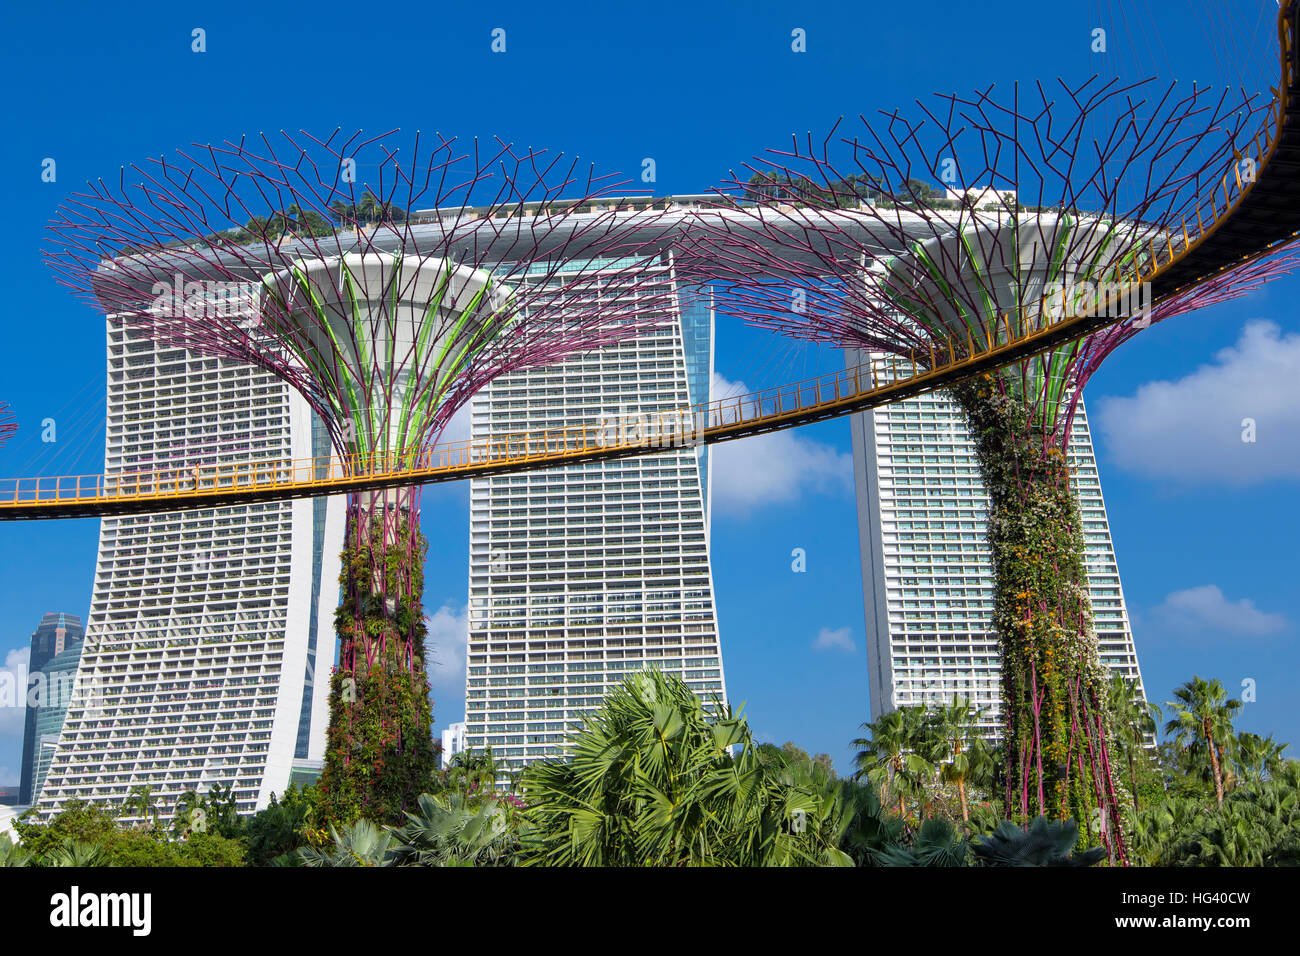 Gardens by the bay et Marina Bay Sands Hotel, Singapore Banque D'Images